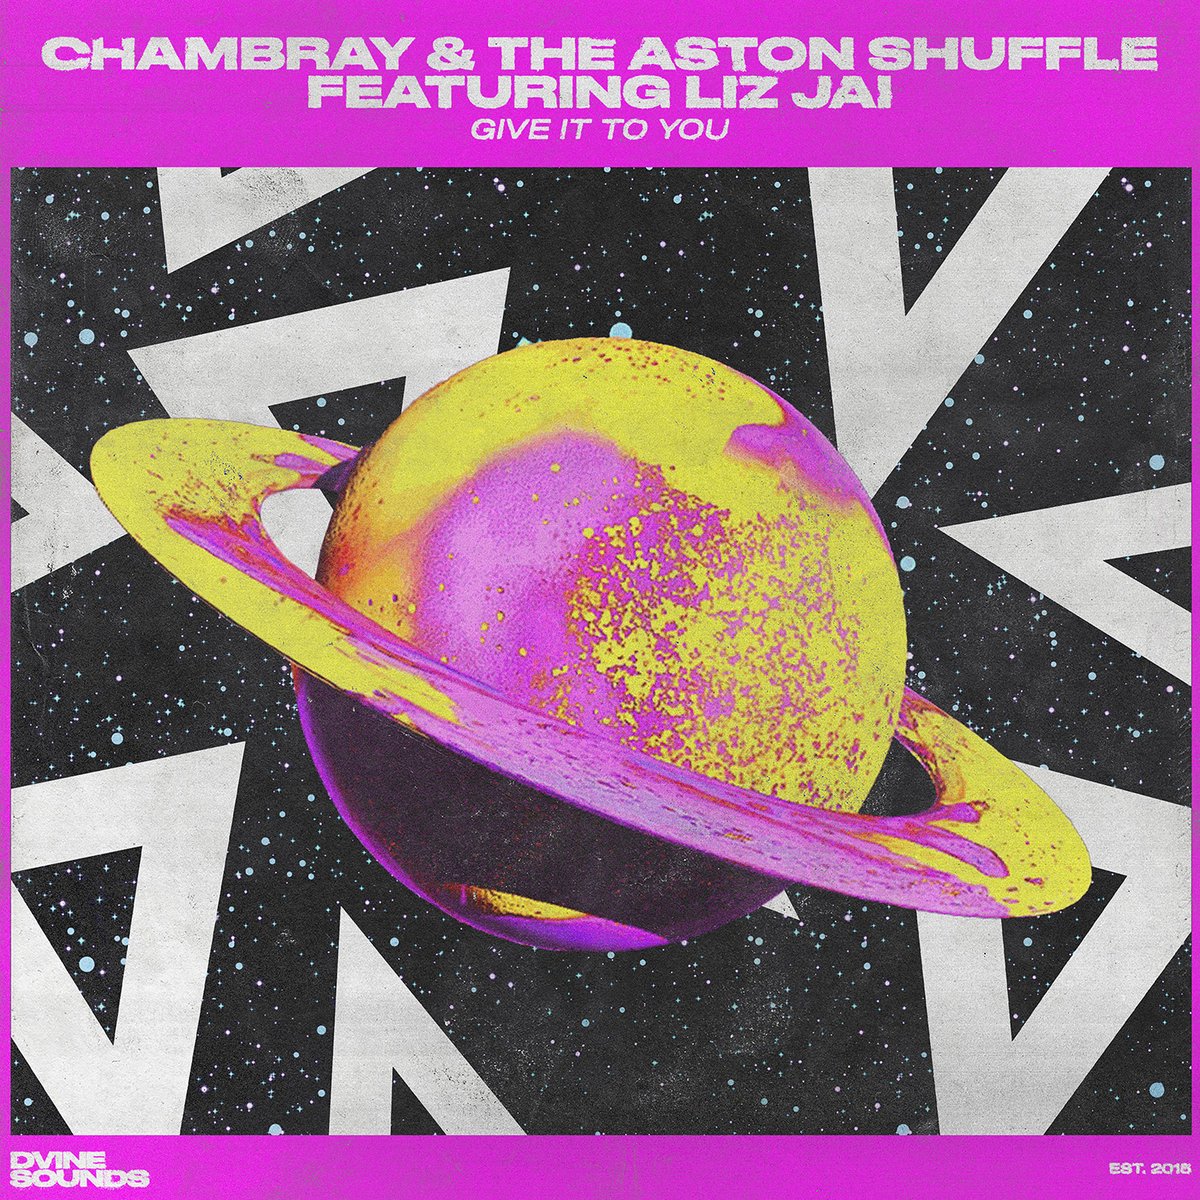 Australia’s own @theastonshuffle combines with Berlin’s @iamchambray to deliver a new high quality original 'Give It To You’ featuring vocals from London-based singer and songwriter @lizjaimusic. On promo now from @DVineSounds